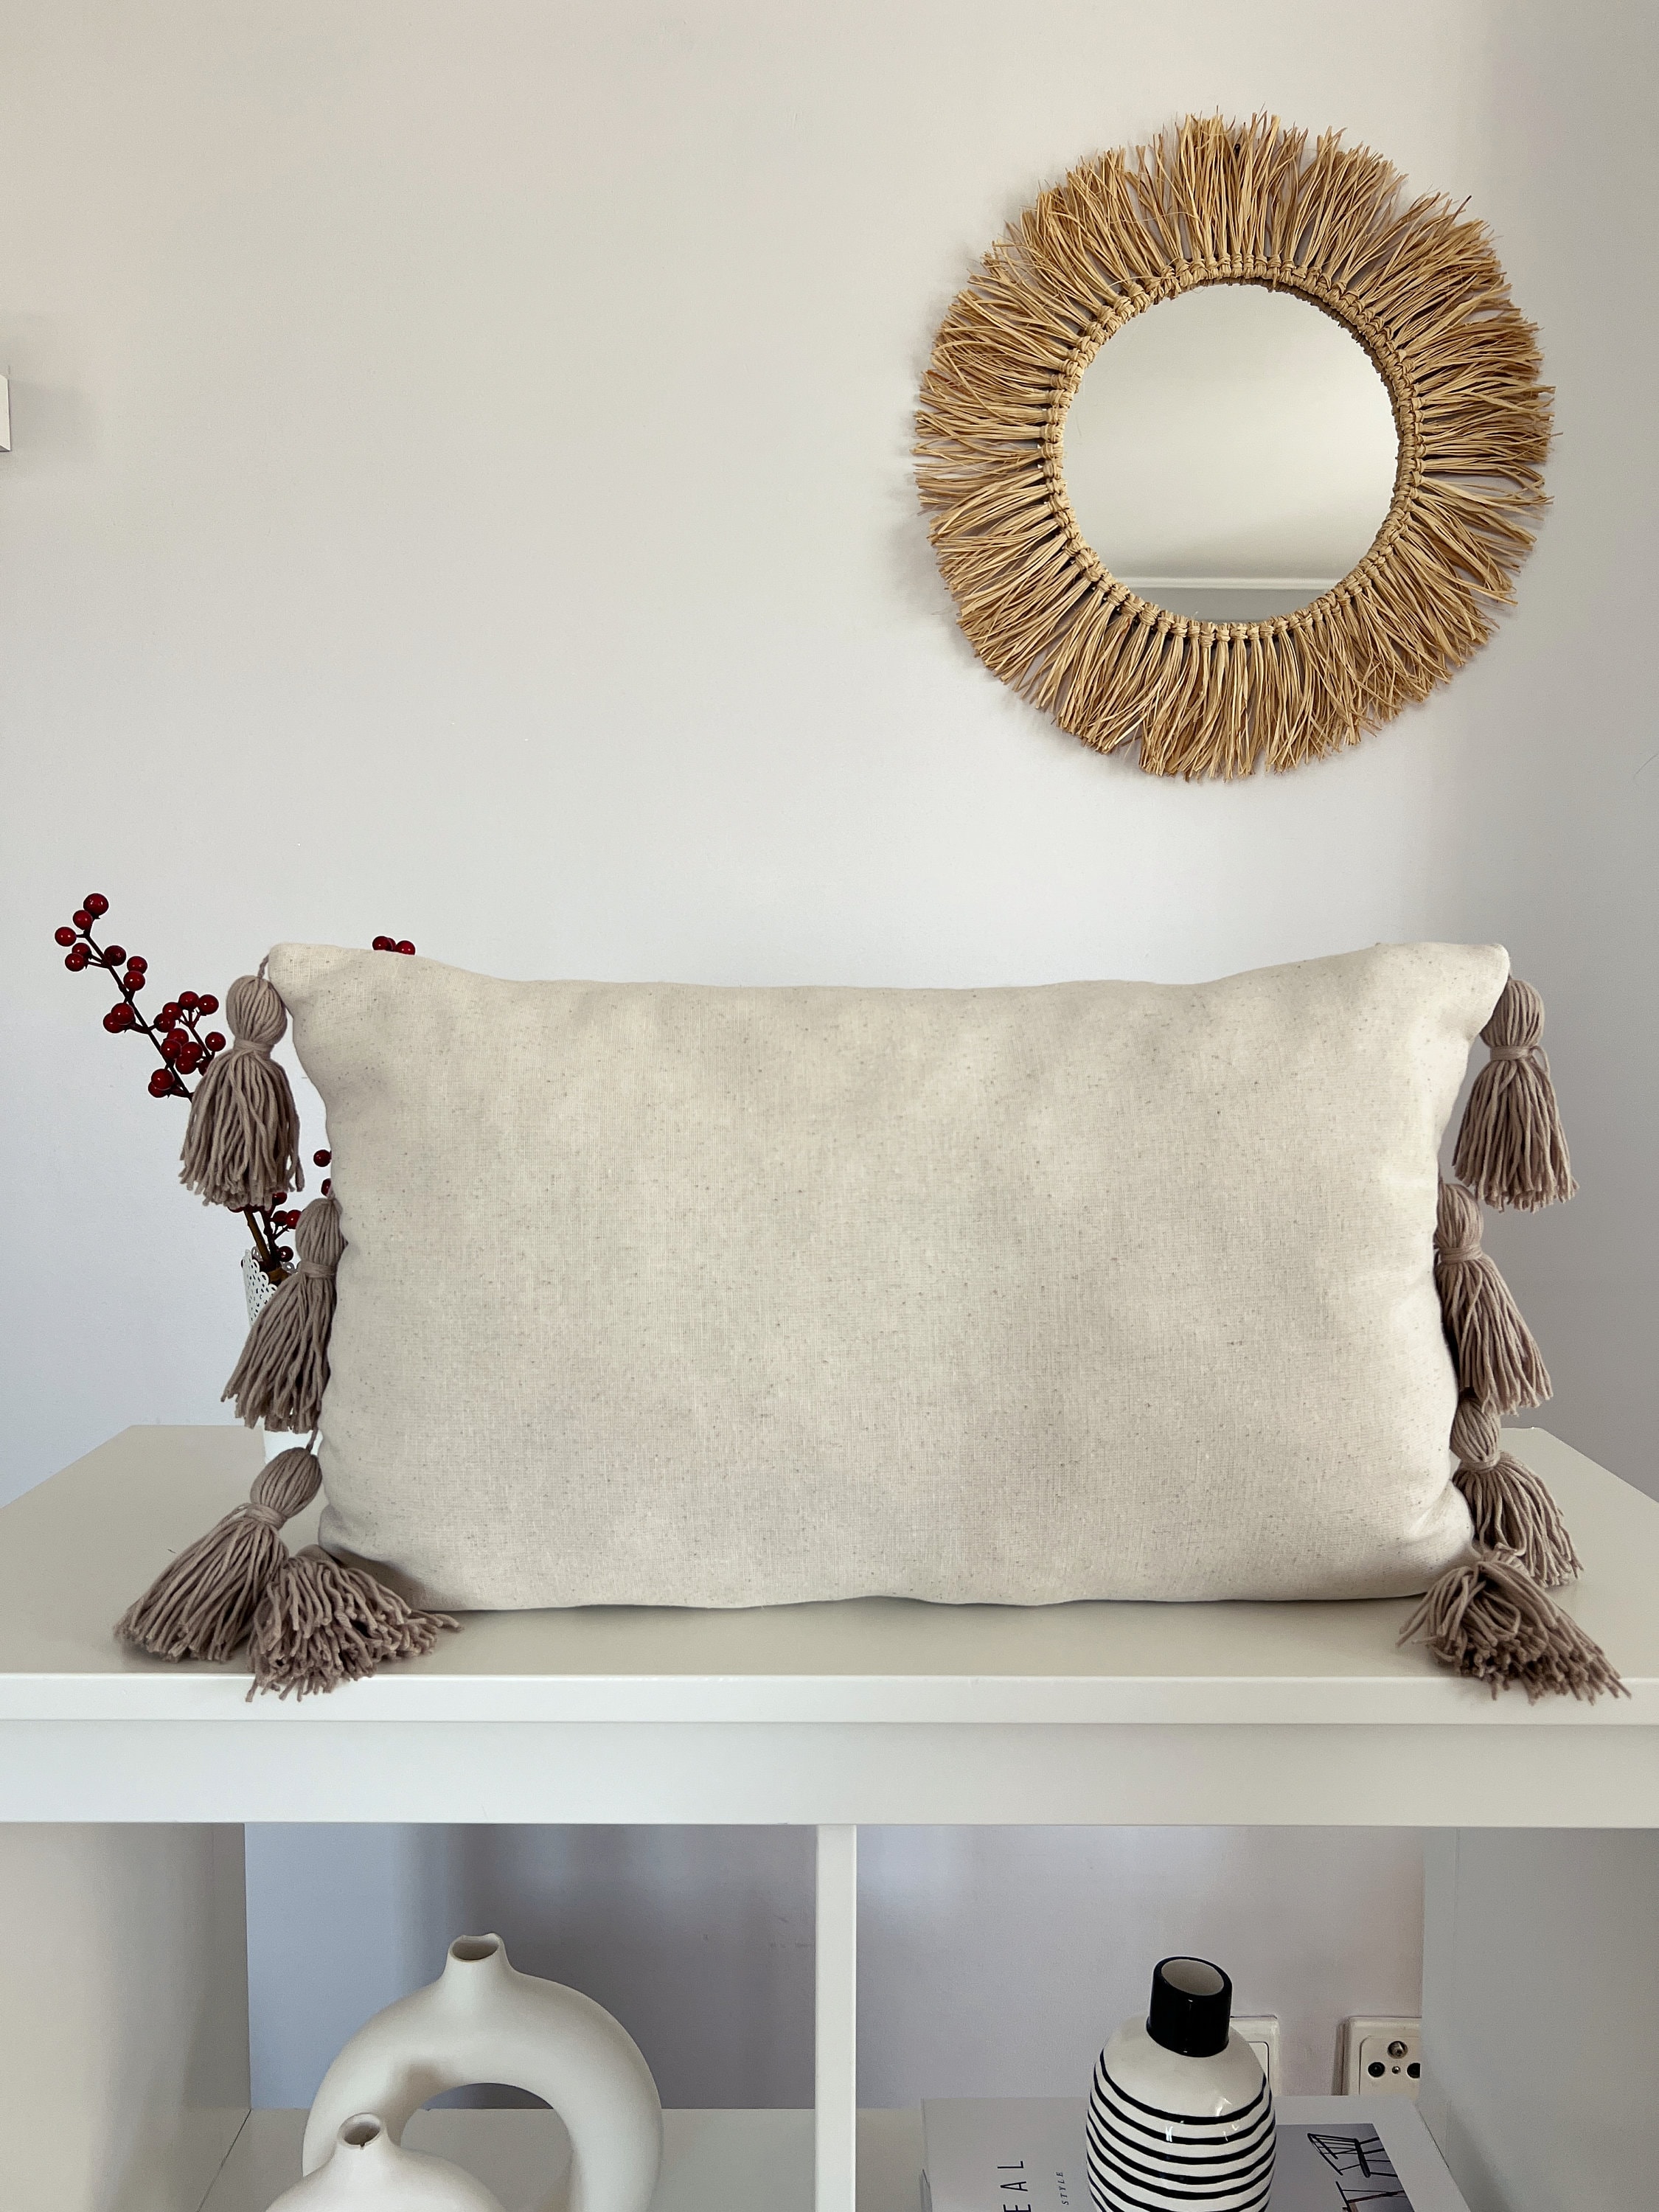 Hand Tufted Punch Needle Pillow Cover, Decorative Boho Throw